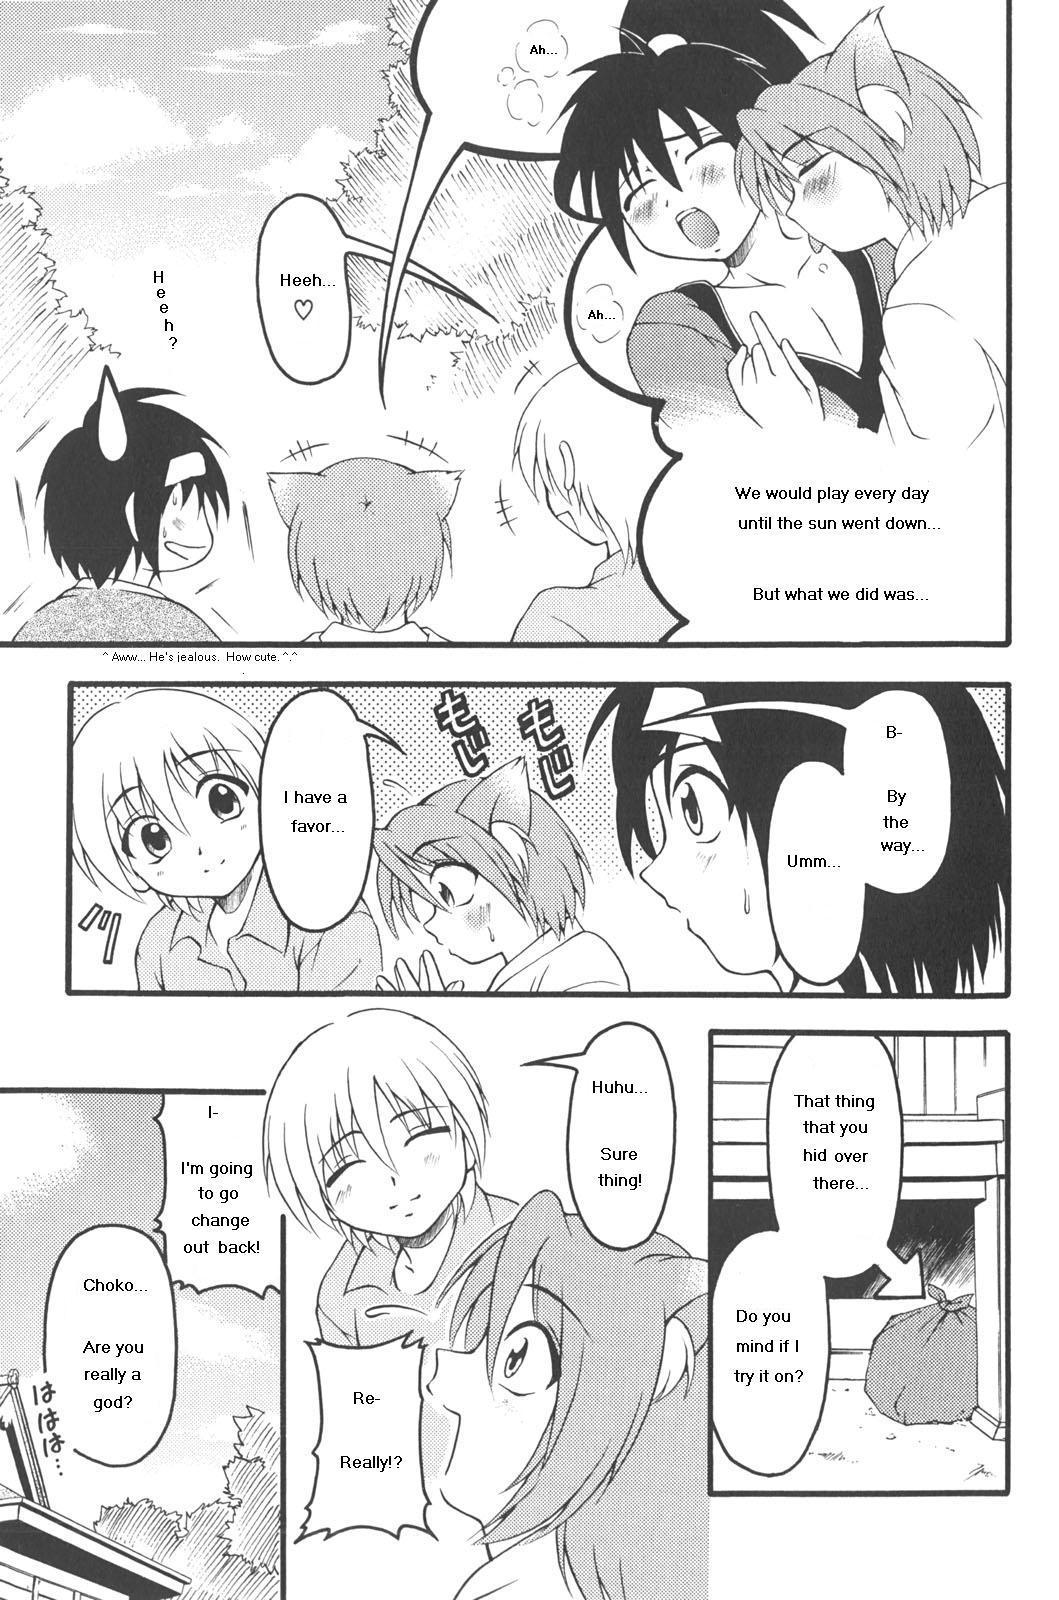 Pounding Fox God and Us - Part One English - Page 5